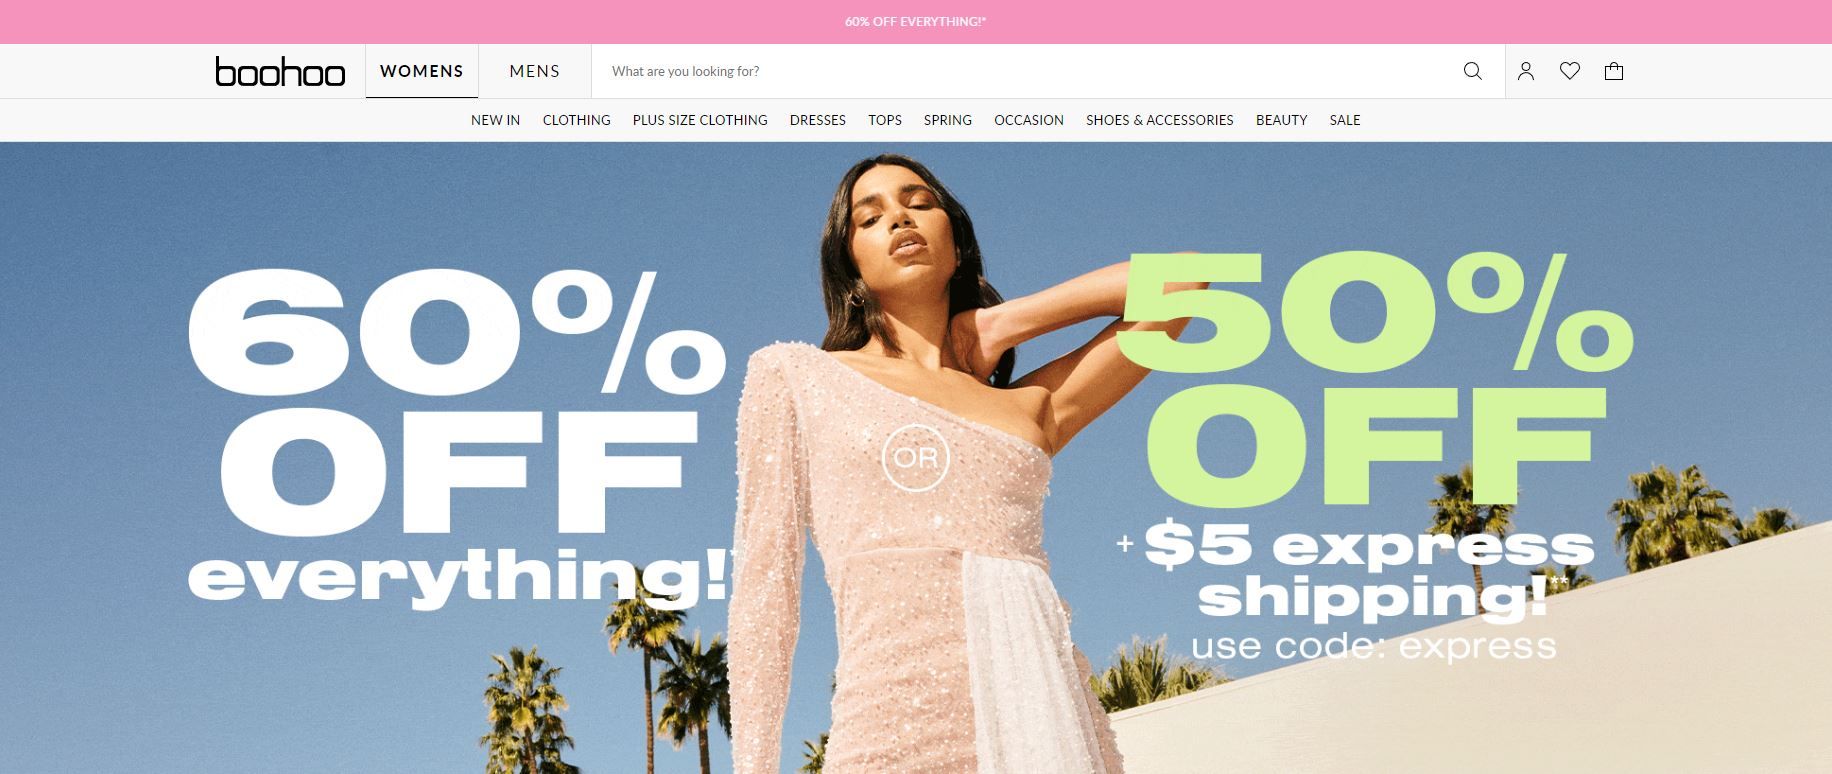 5 Stores Like Shein